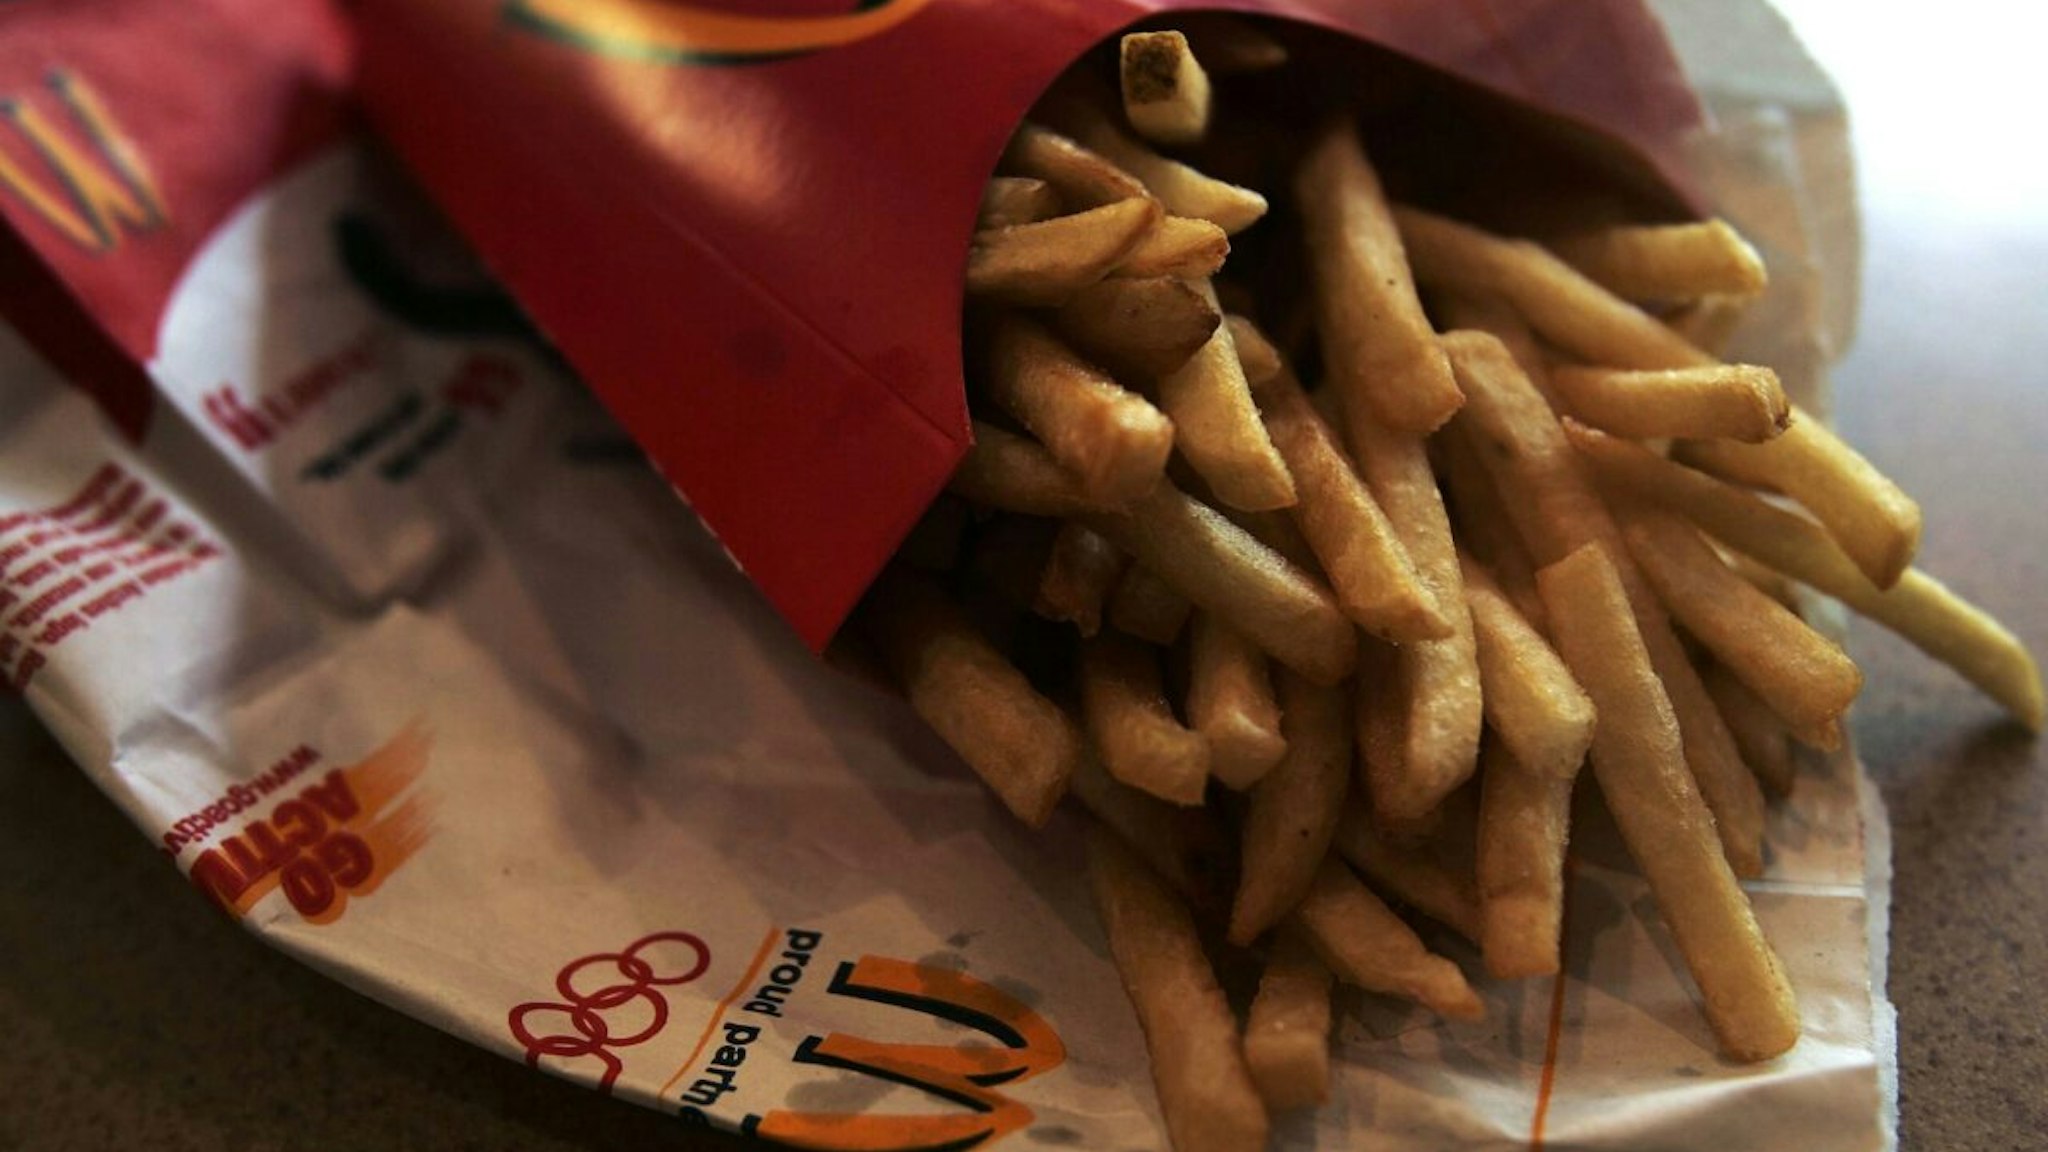 French fries are displayed on a table in a McDonald's restaurant September 27, 2006 in New York City.